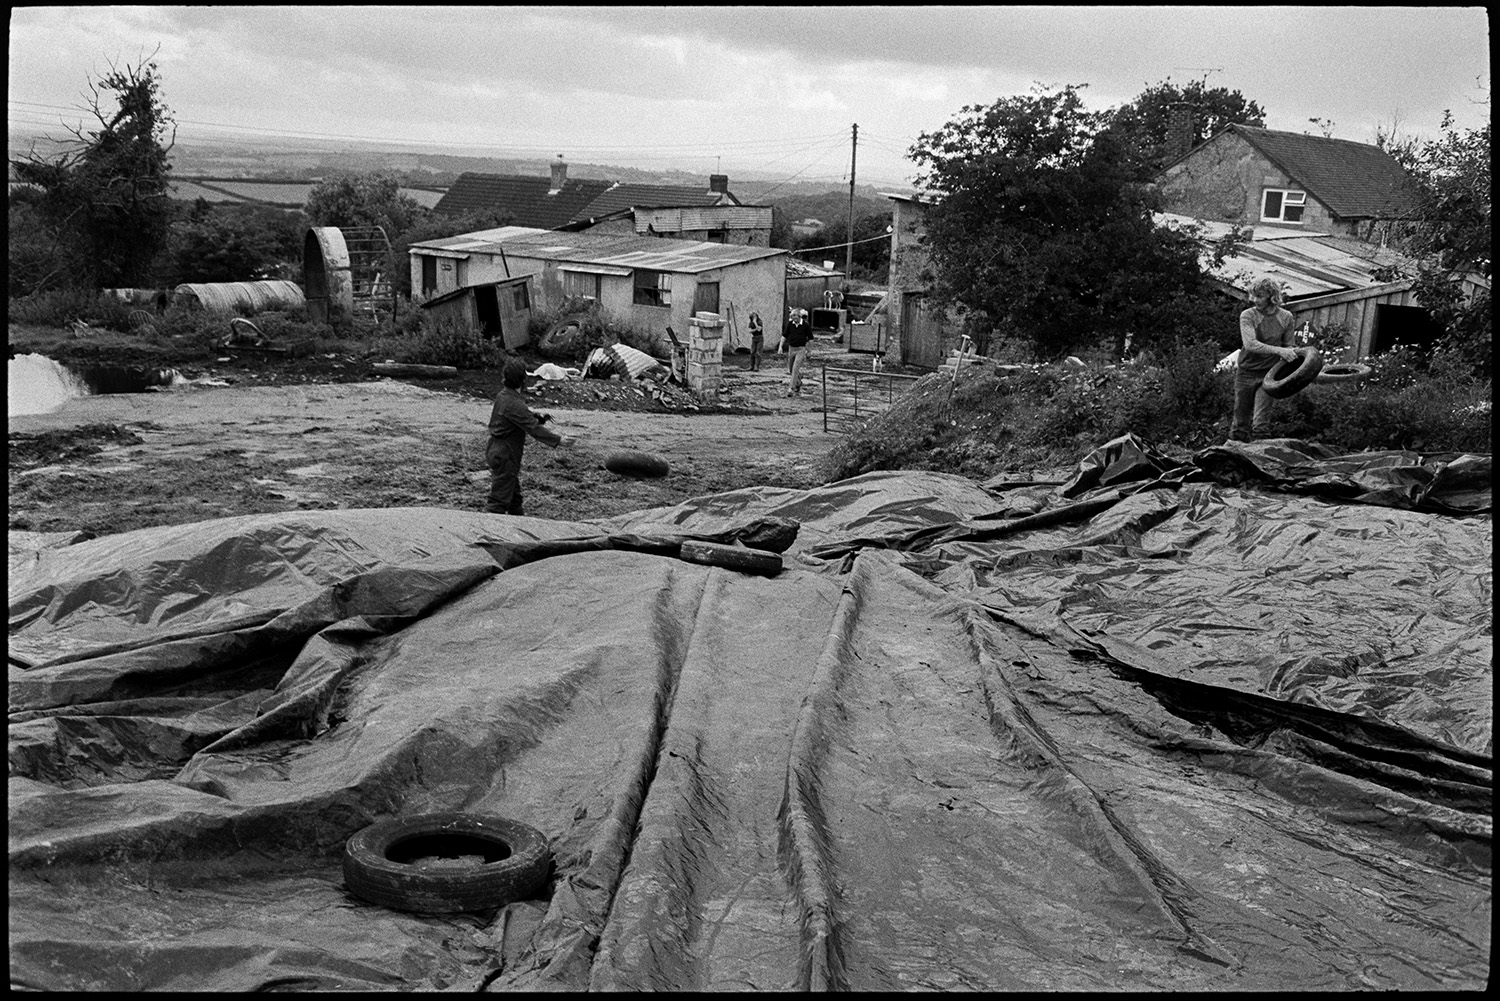 Farmer covering silage with large sheet of polythene. 
[Two men covering a mound of silage with a polythene sheet at Upcott, Dolton. They are weighting the sheet down with tyres. Sheds and rooftops can be seen in the background.]]